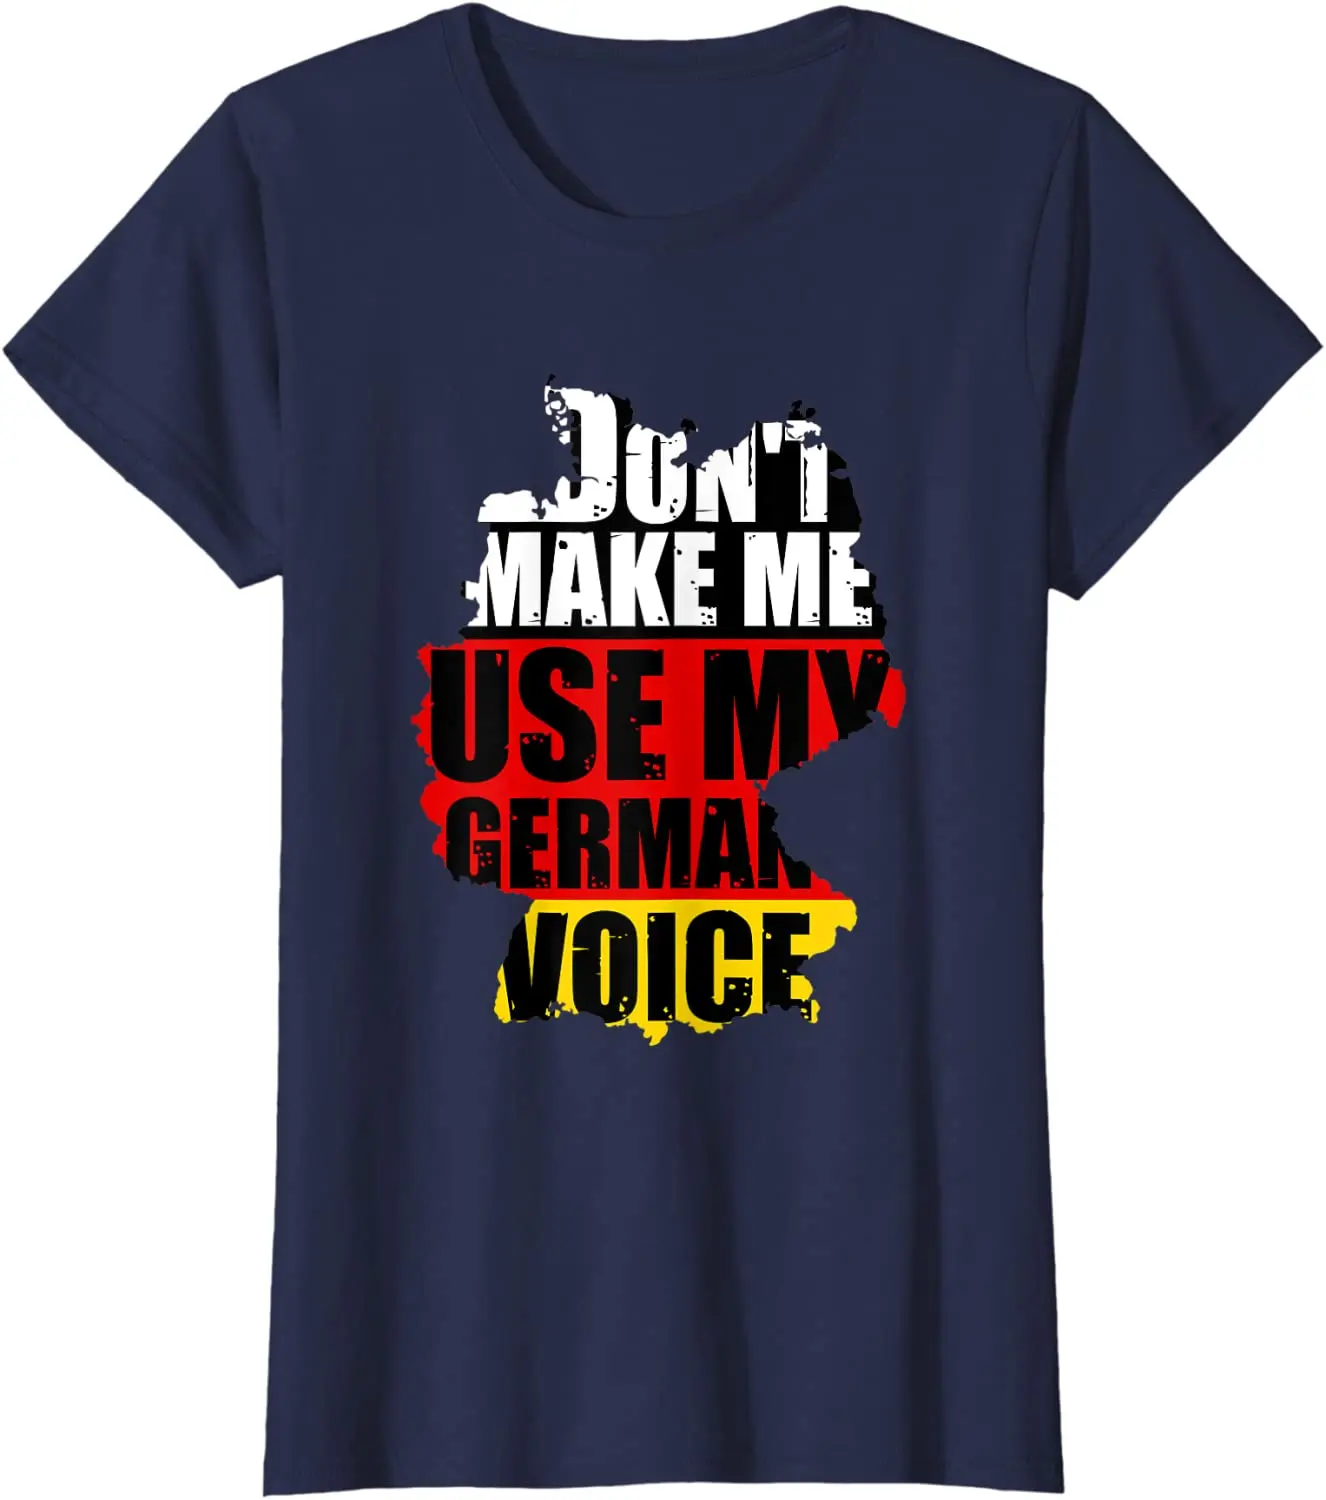 Don't Make Me Use My German Voice. Funny Germany Flag Heritage T-Shirt. Summer Cotton Short Sleeve O-Neck Mens T Shirt New S-3XL